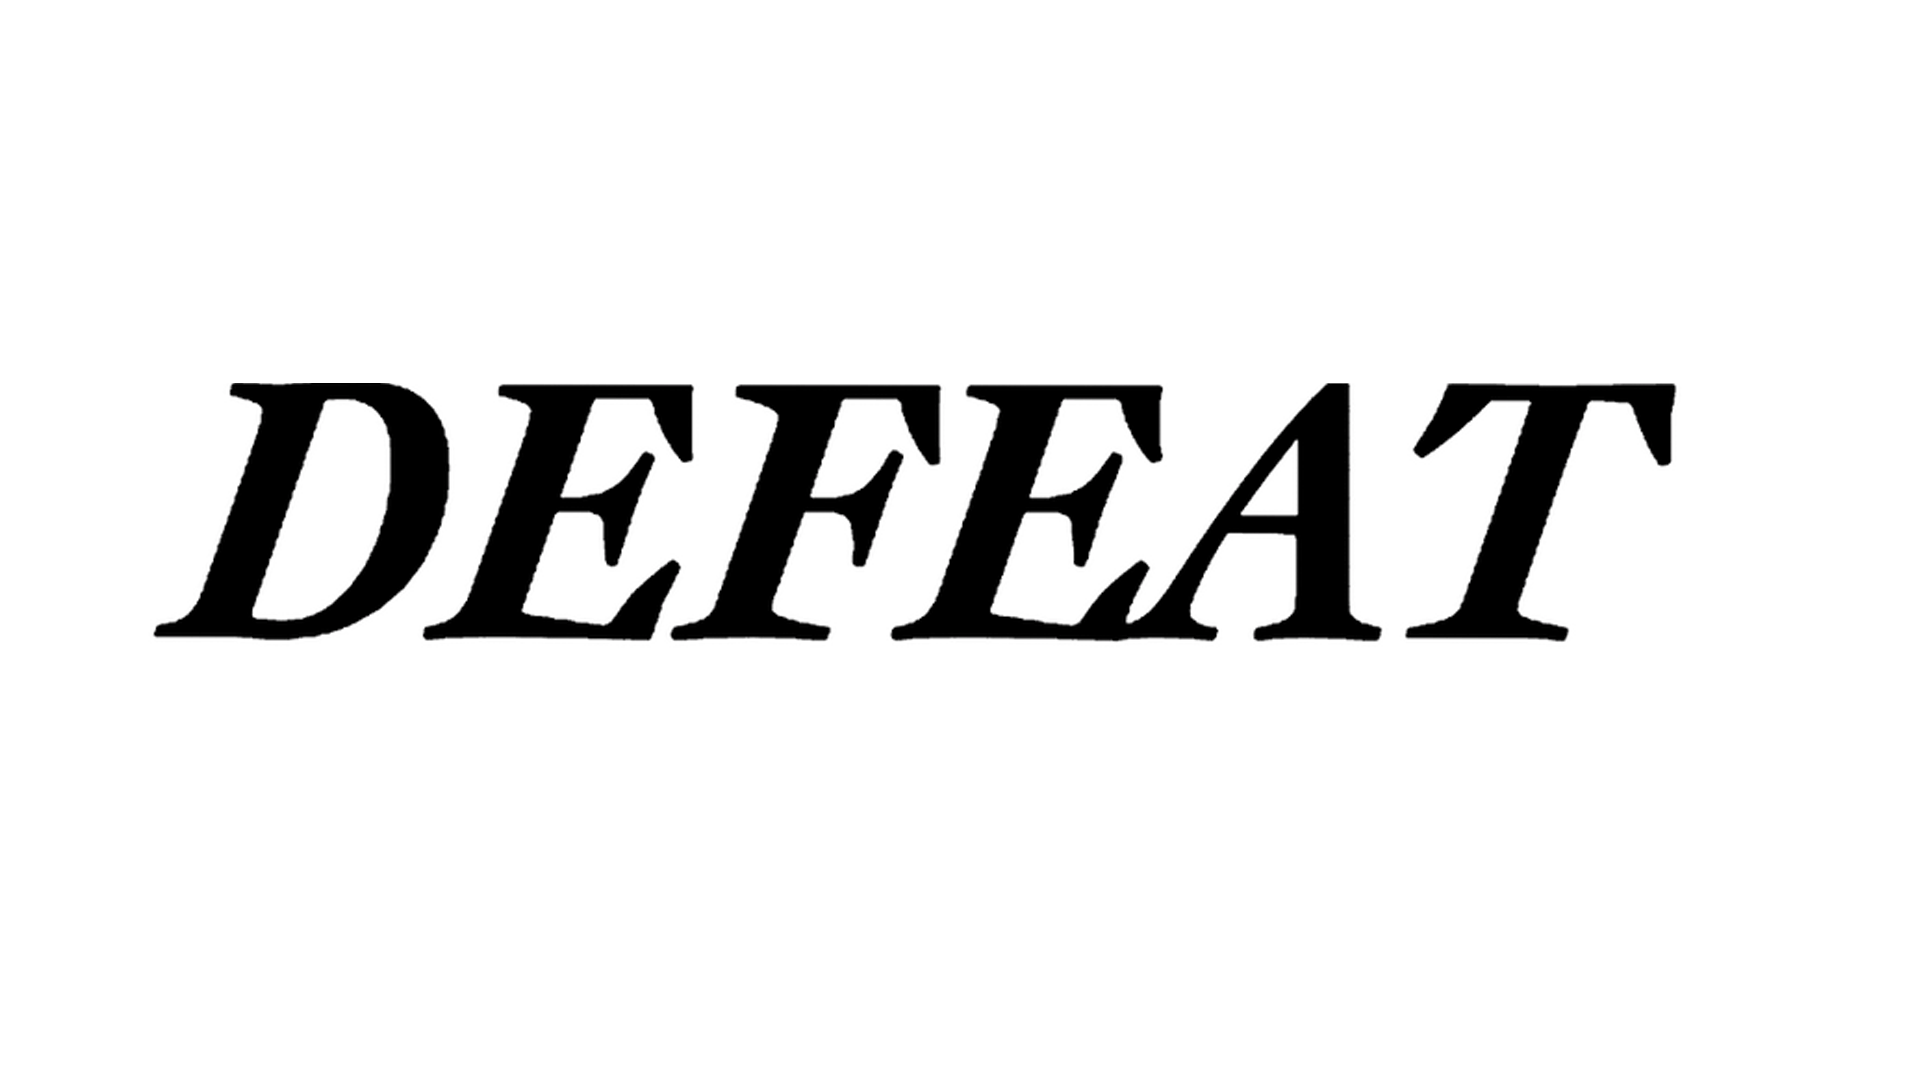 DEFEAT_defeat & VICTORY_victory